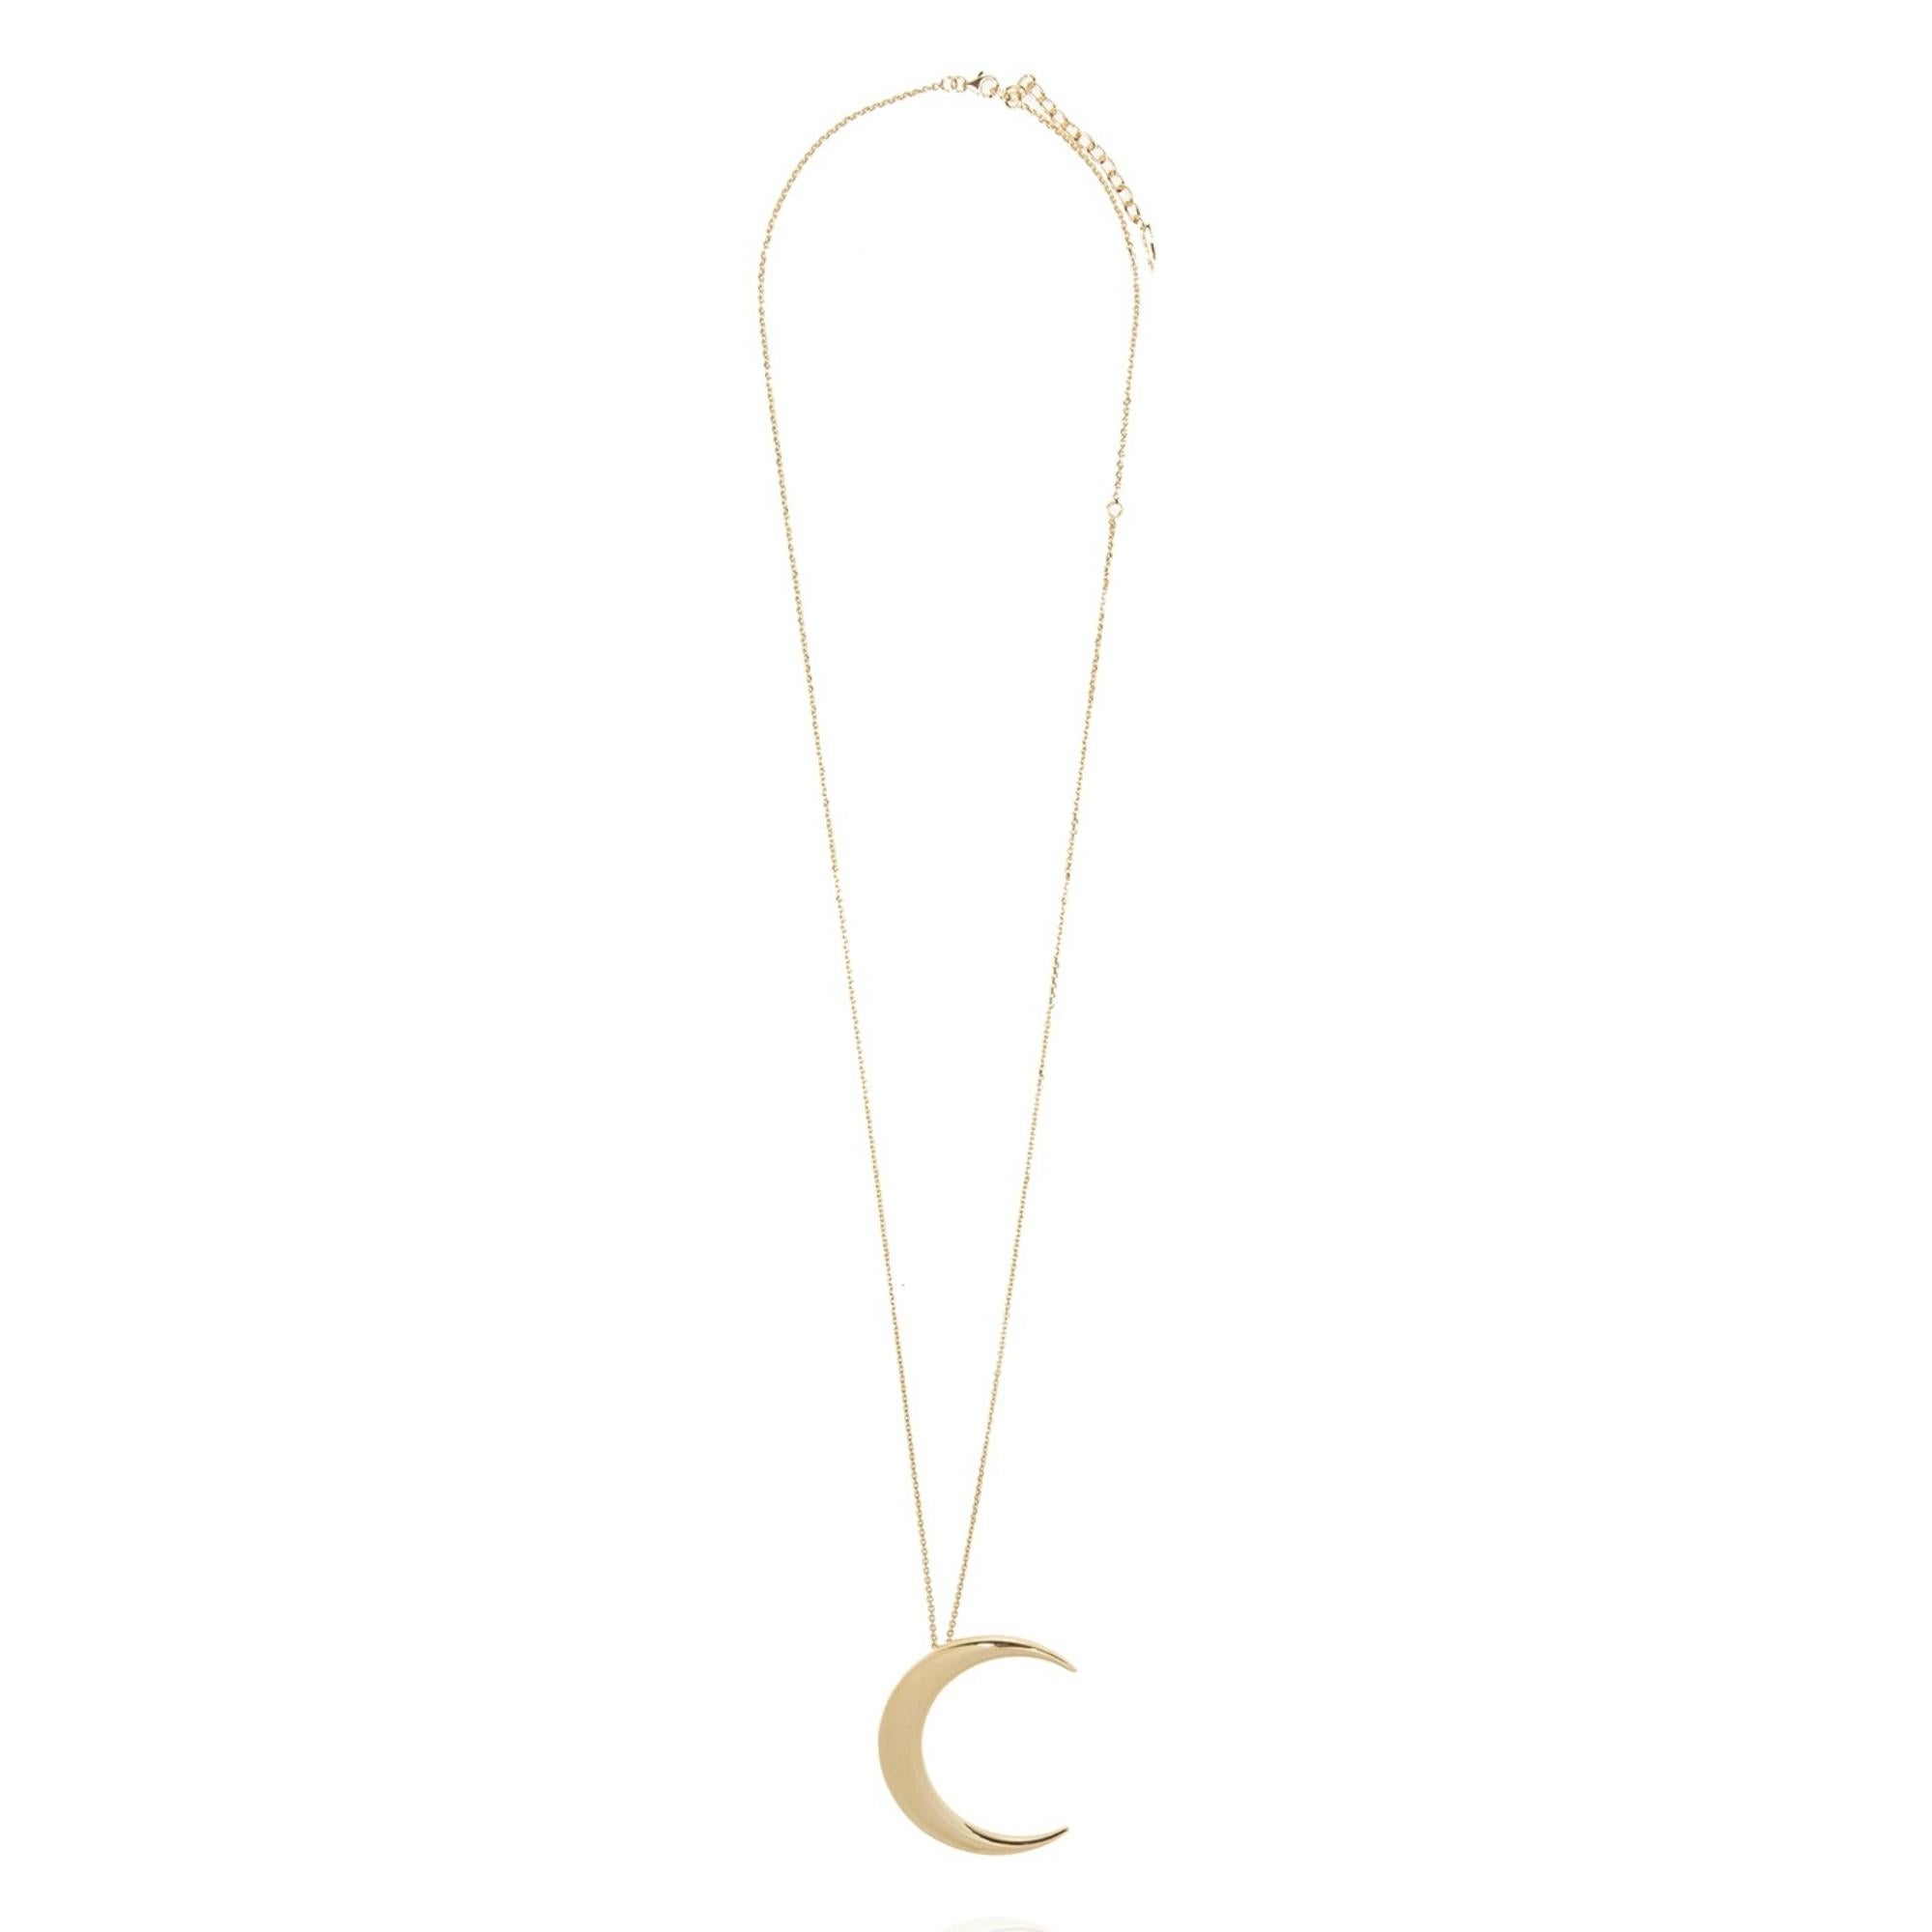 Gold-tone necklace from Saint Laurent. Made of brass, it is engraved with label's logo and embellished with moon pendant.

Color: Gold tone
Material: Brass
Item Code: 622692
Clasp Style: Lobster
Year: 2022

Measures
Chain length 32”
Pendant drop: